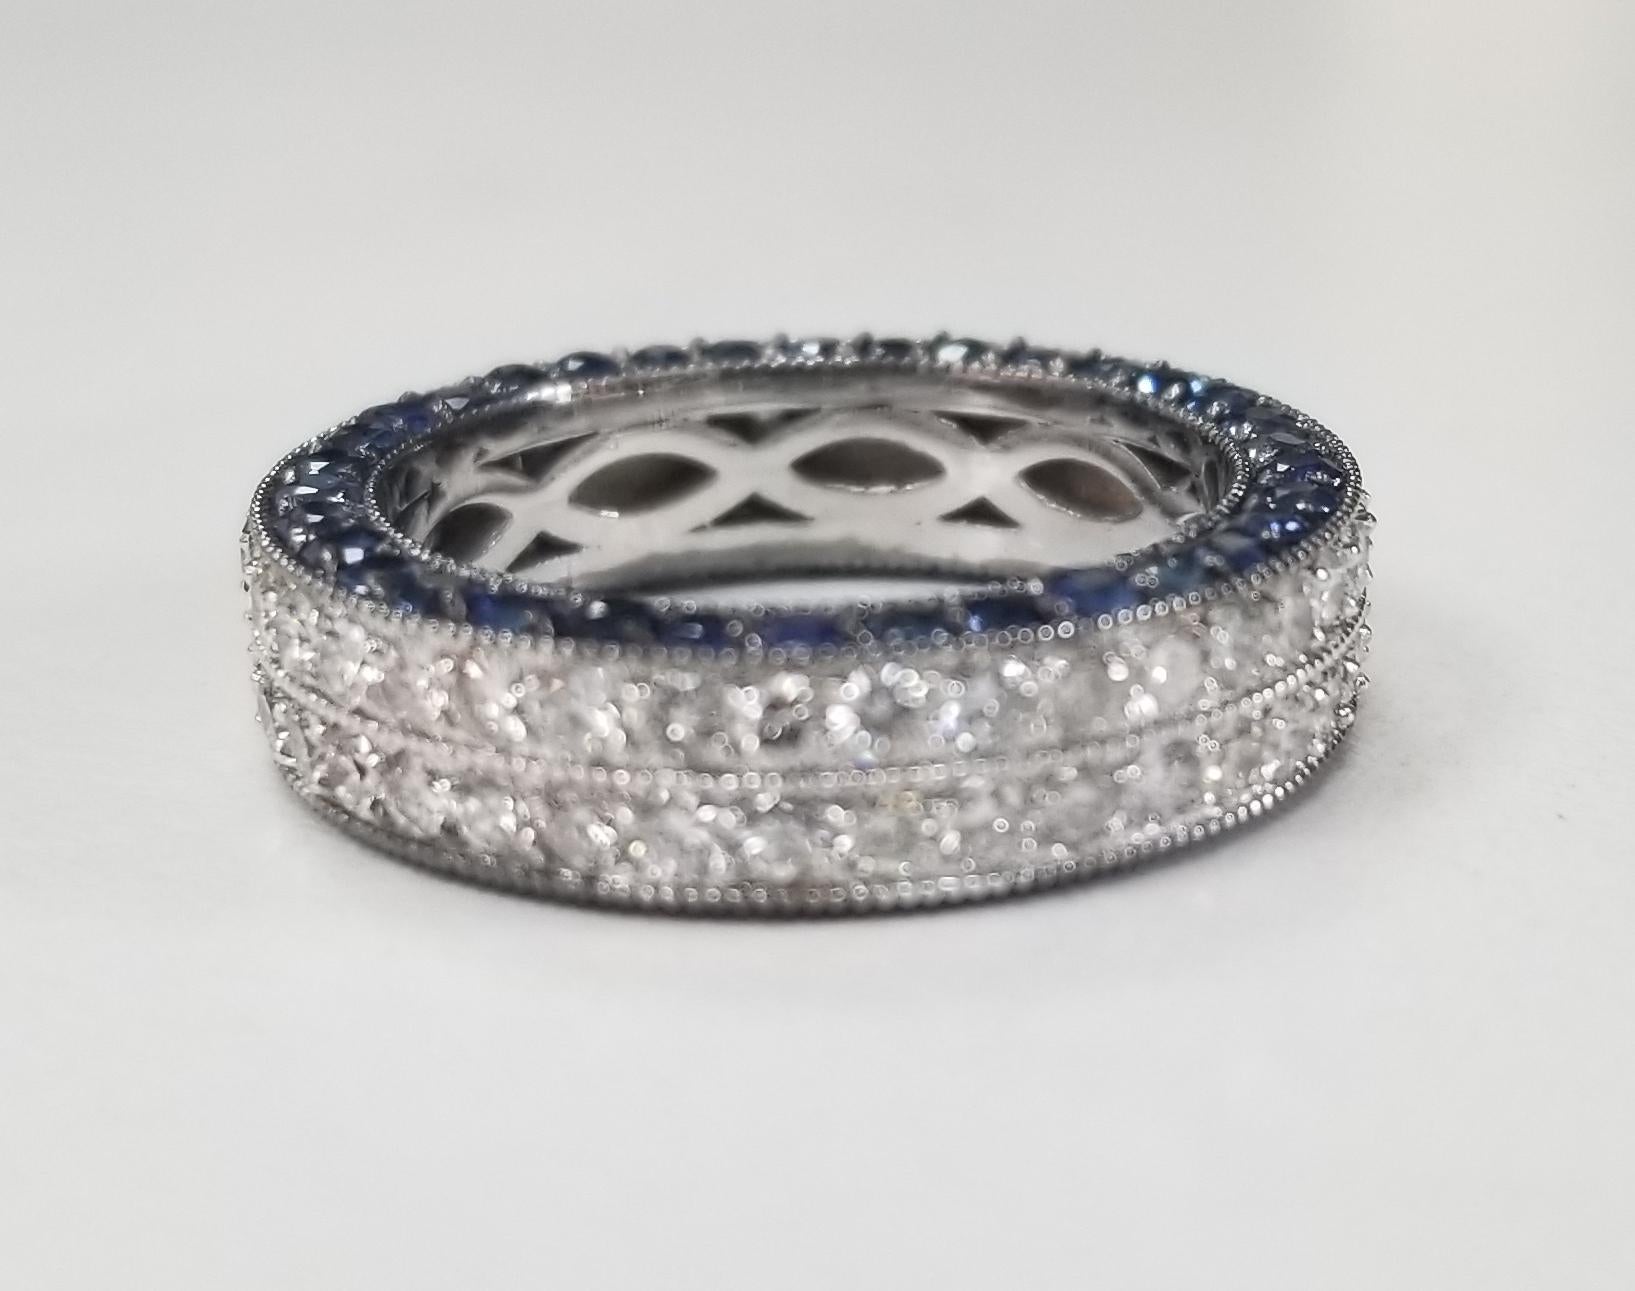 14k white gold ladies 2 row diamond pave eternity ring with sapphires pave in the side of the ring, containing 76 round full cut diamonds of very fine quality weighing 1.65cts. and 68 round blue sapphires weighing 2.15cts. ring size is 6.25, a new